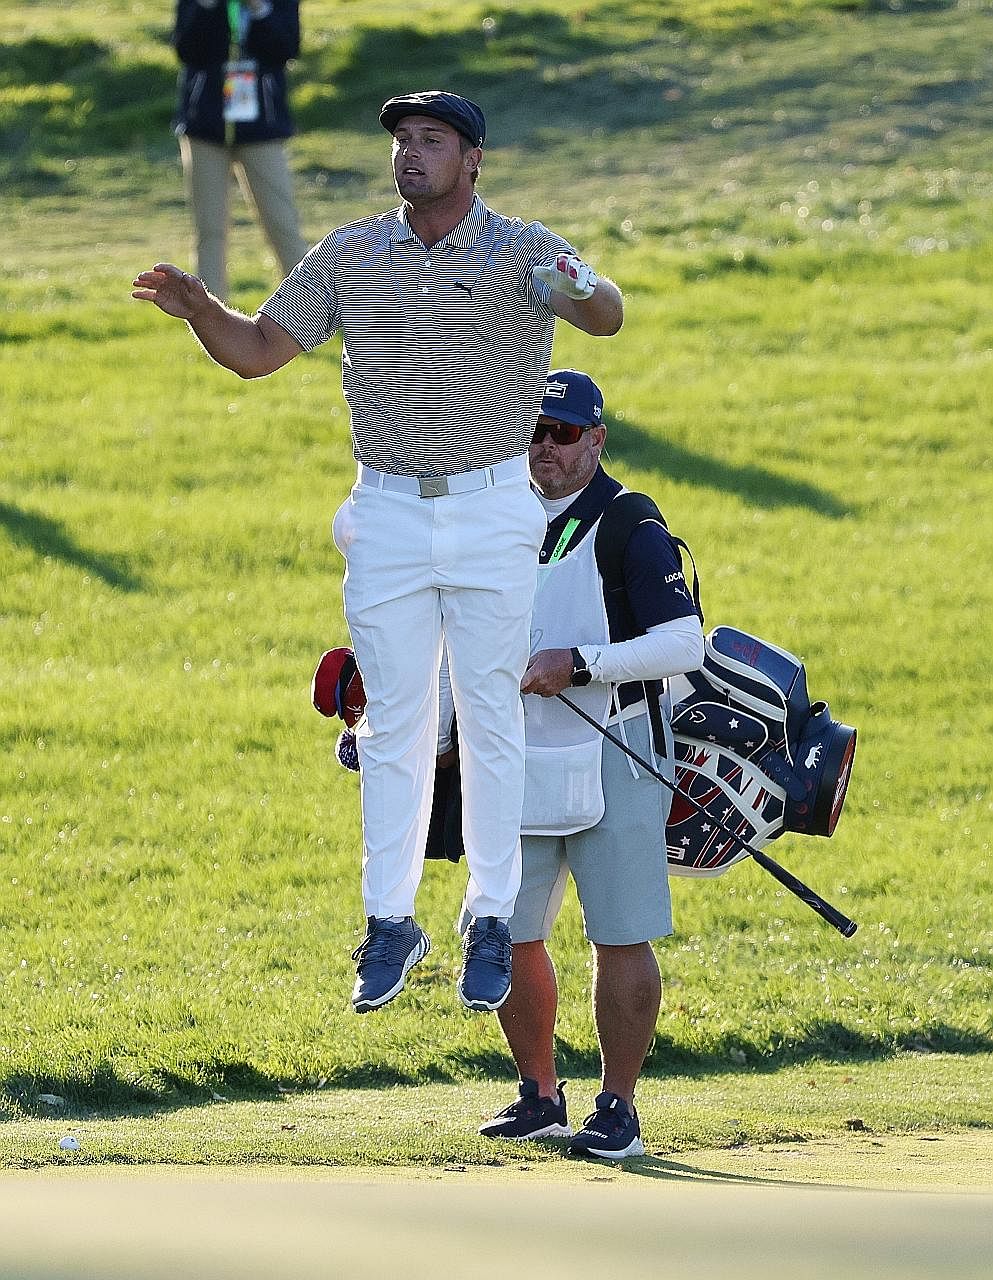 Bryson DeChambeau jumping to check the 18th green before playing a chip at Winged Foot Golf Club. He parred the par-four hole despite missing the fairway. He hit 23 fairways all week - an all-time low for a US Open champion, beating Angel Cabrera's 2